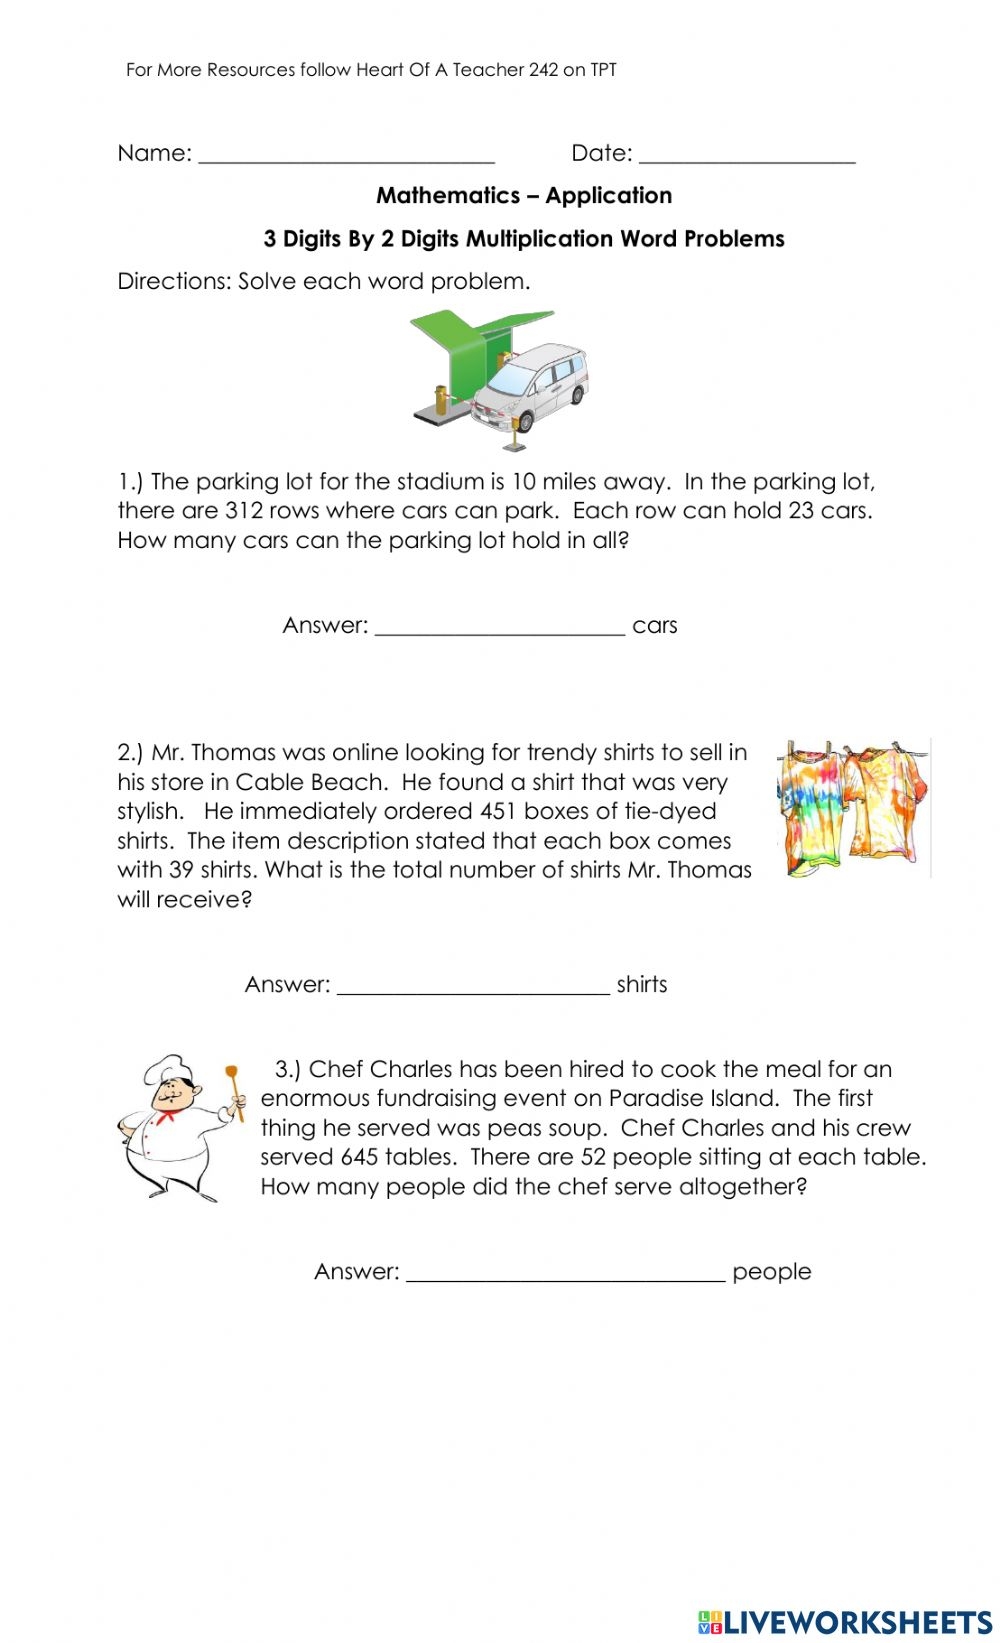 3 Digits By 2 Digits Multiplication Word Problems Worksheet